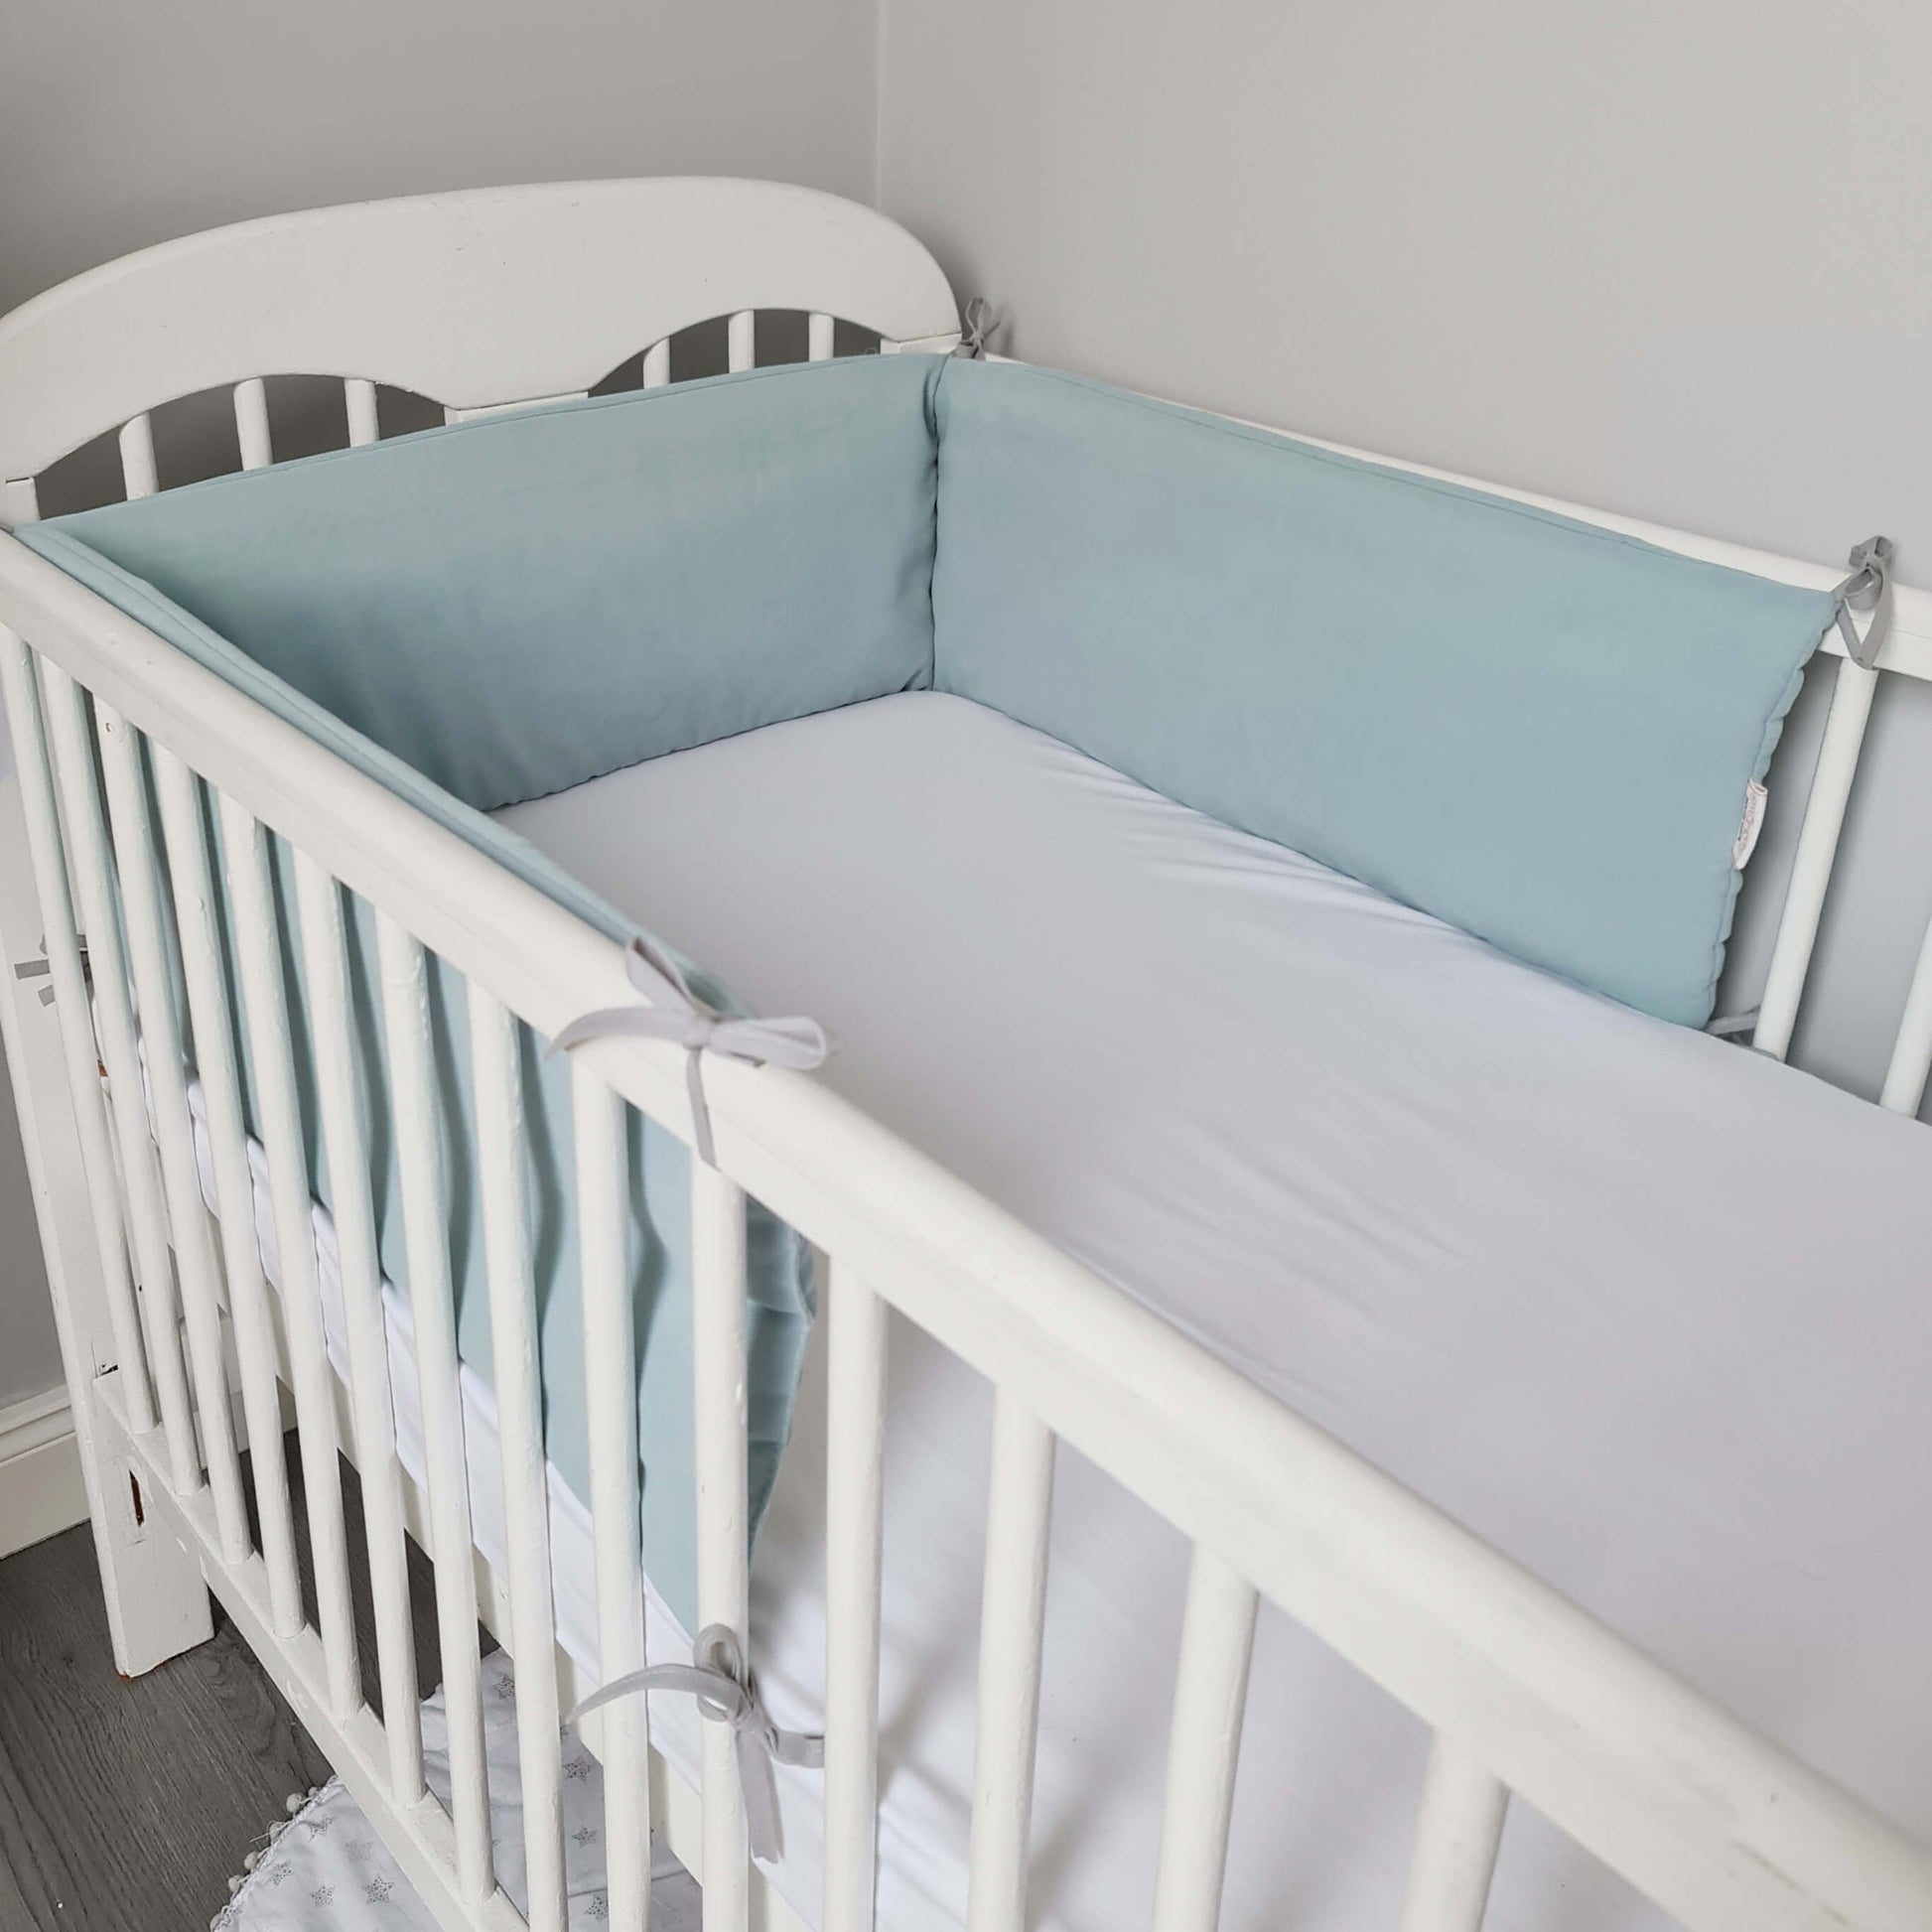 bumper for crib 180cm mint colour with grey ties